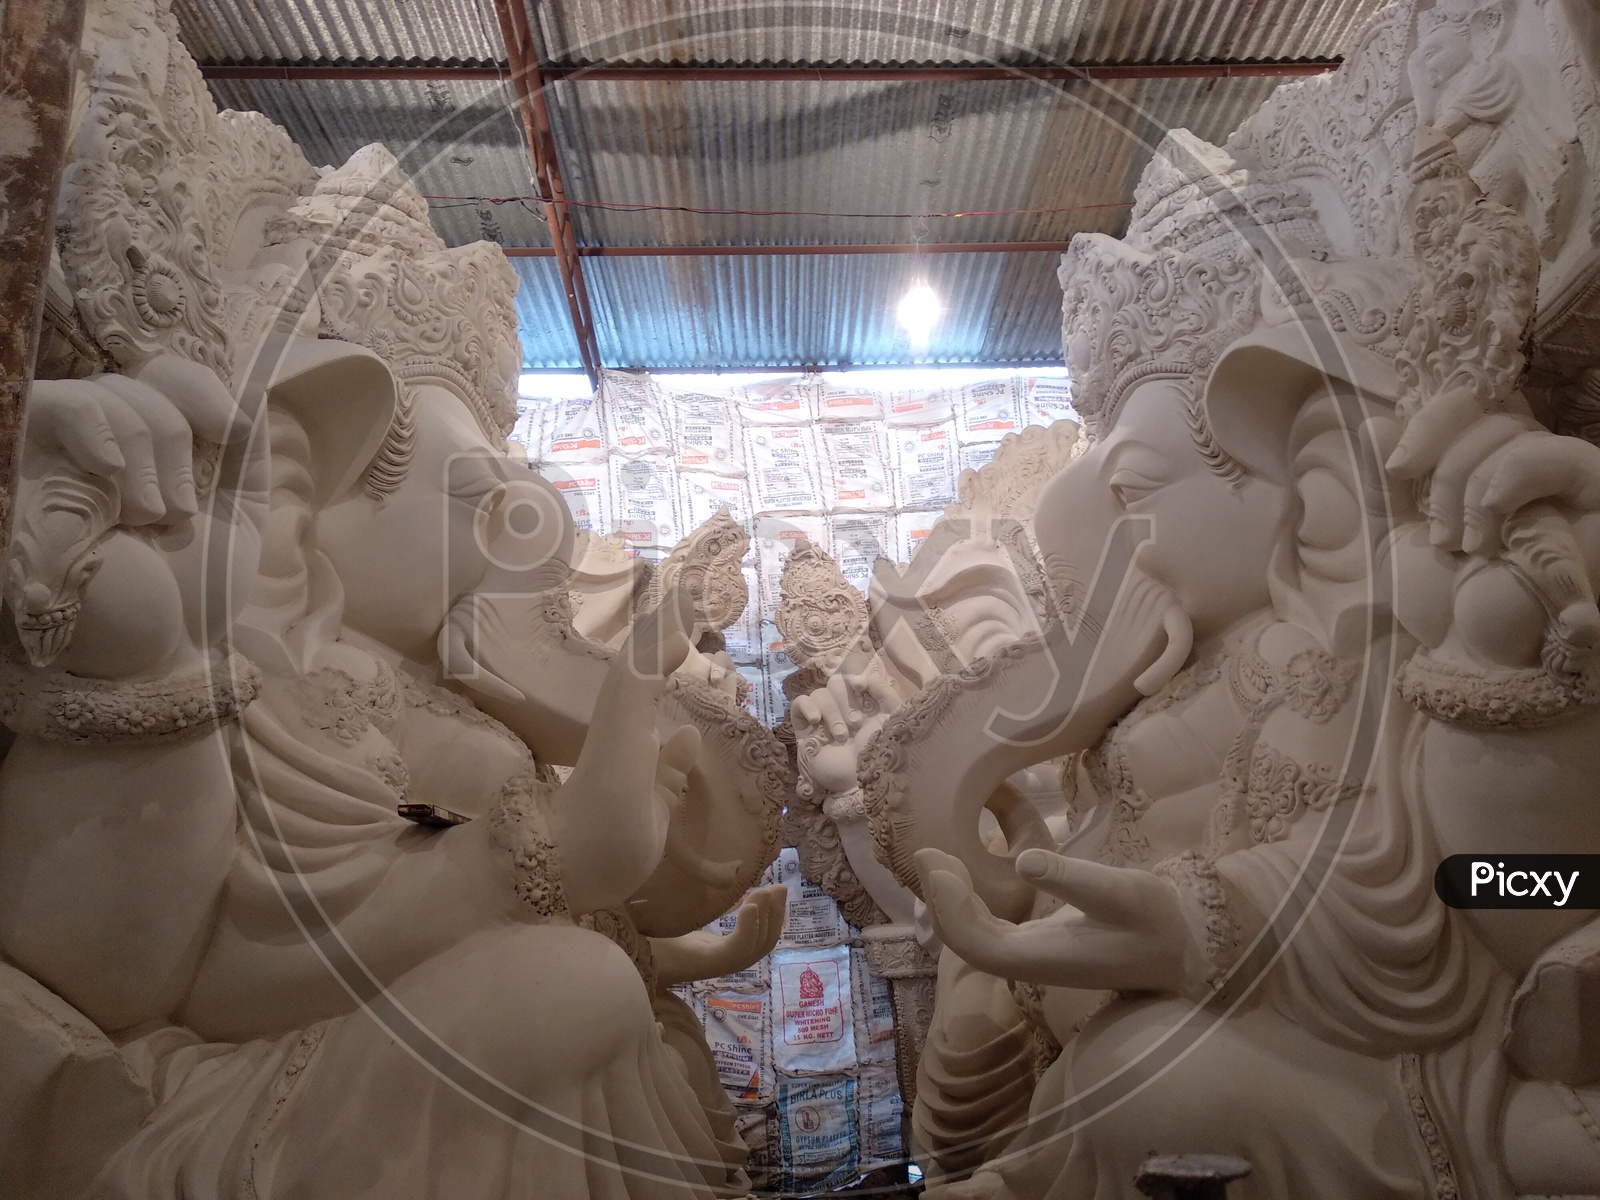 Prepartion of Ganesh Idol for Ganesh Chathurthi. Vinayaka Idol done with finshing and getting ready to paint